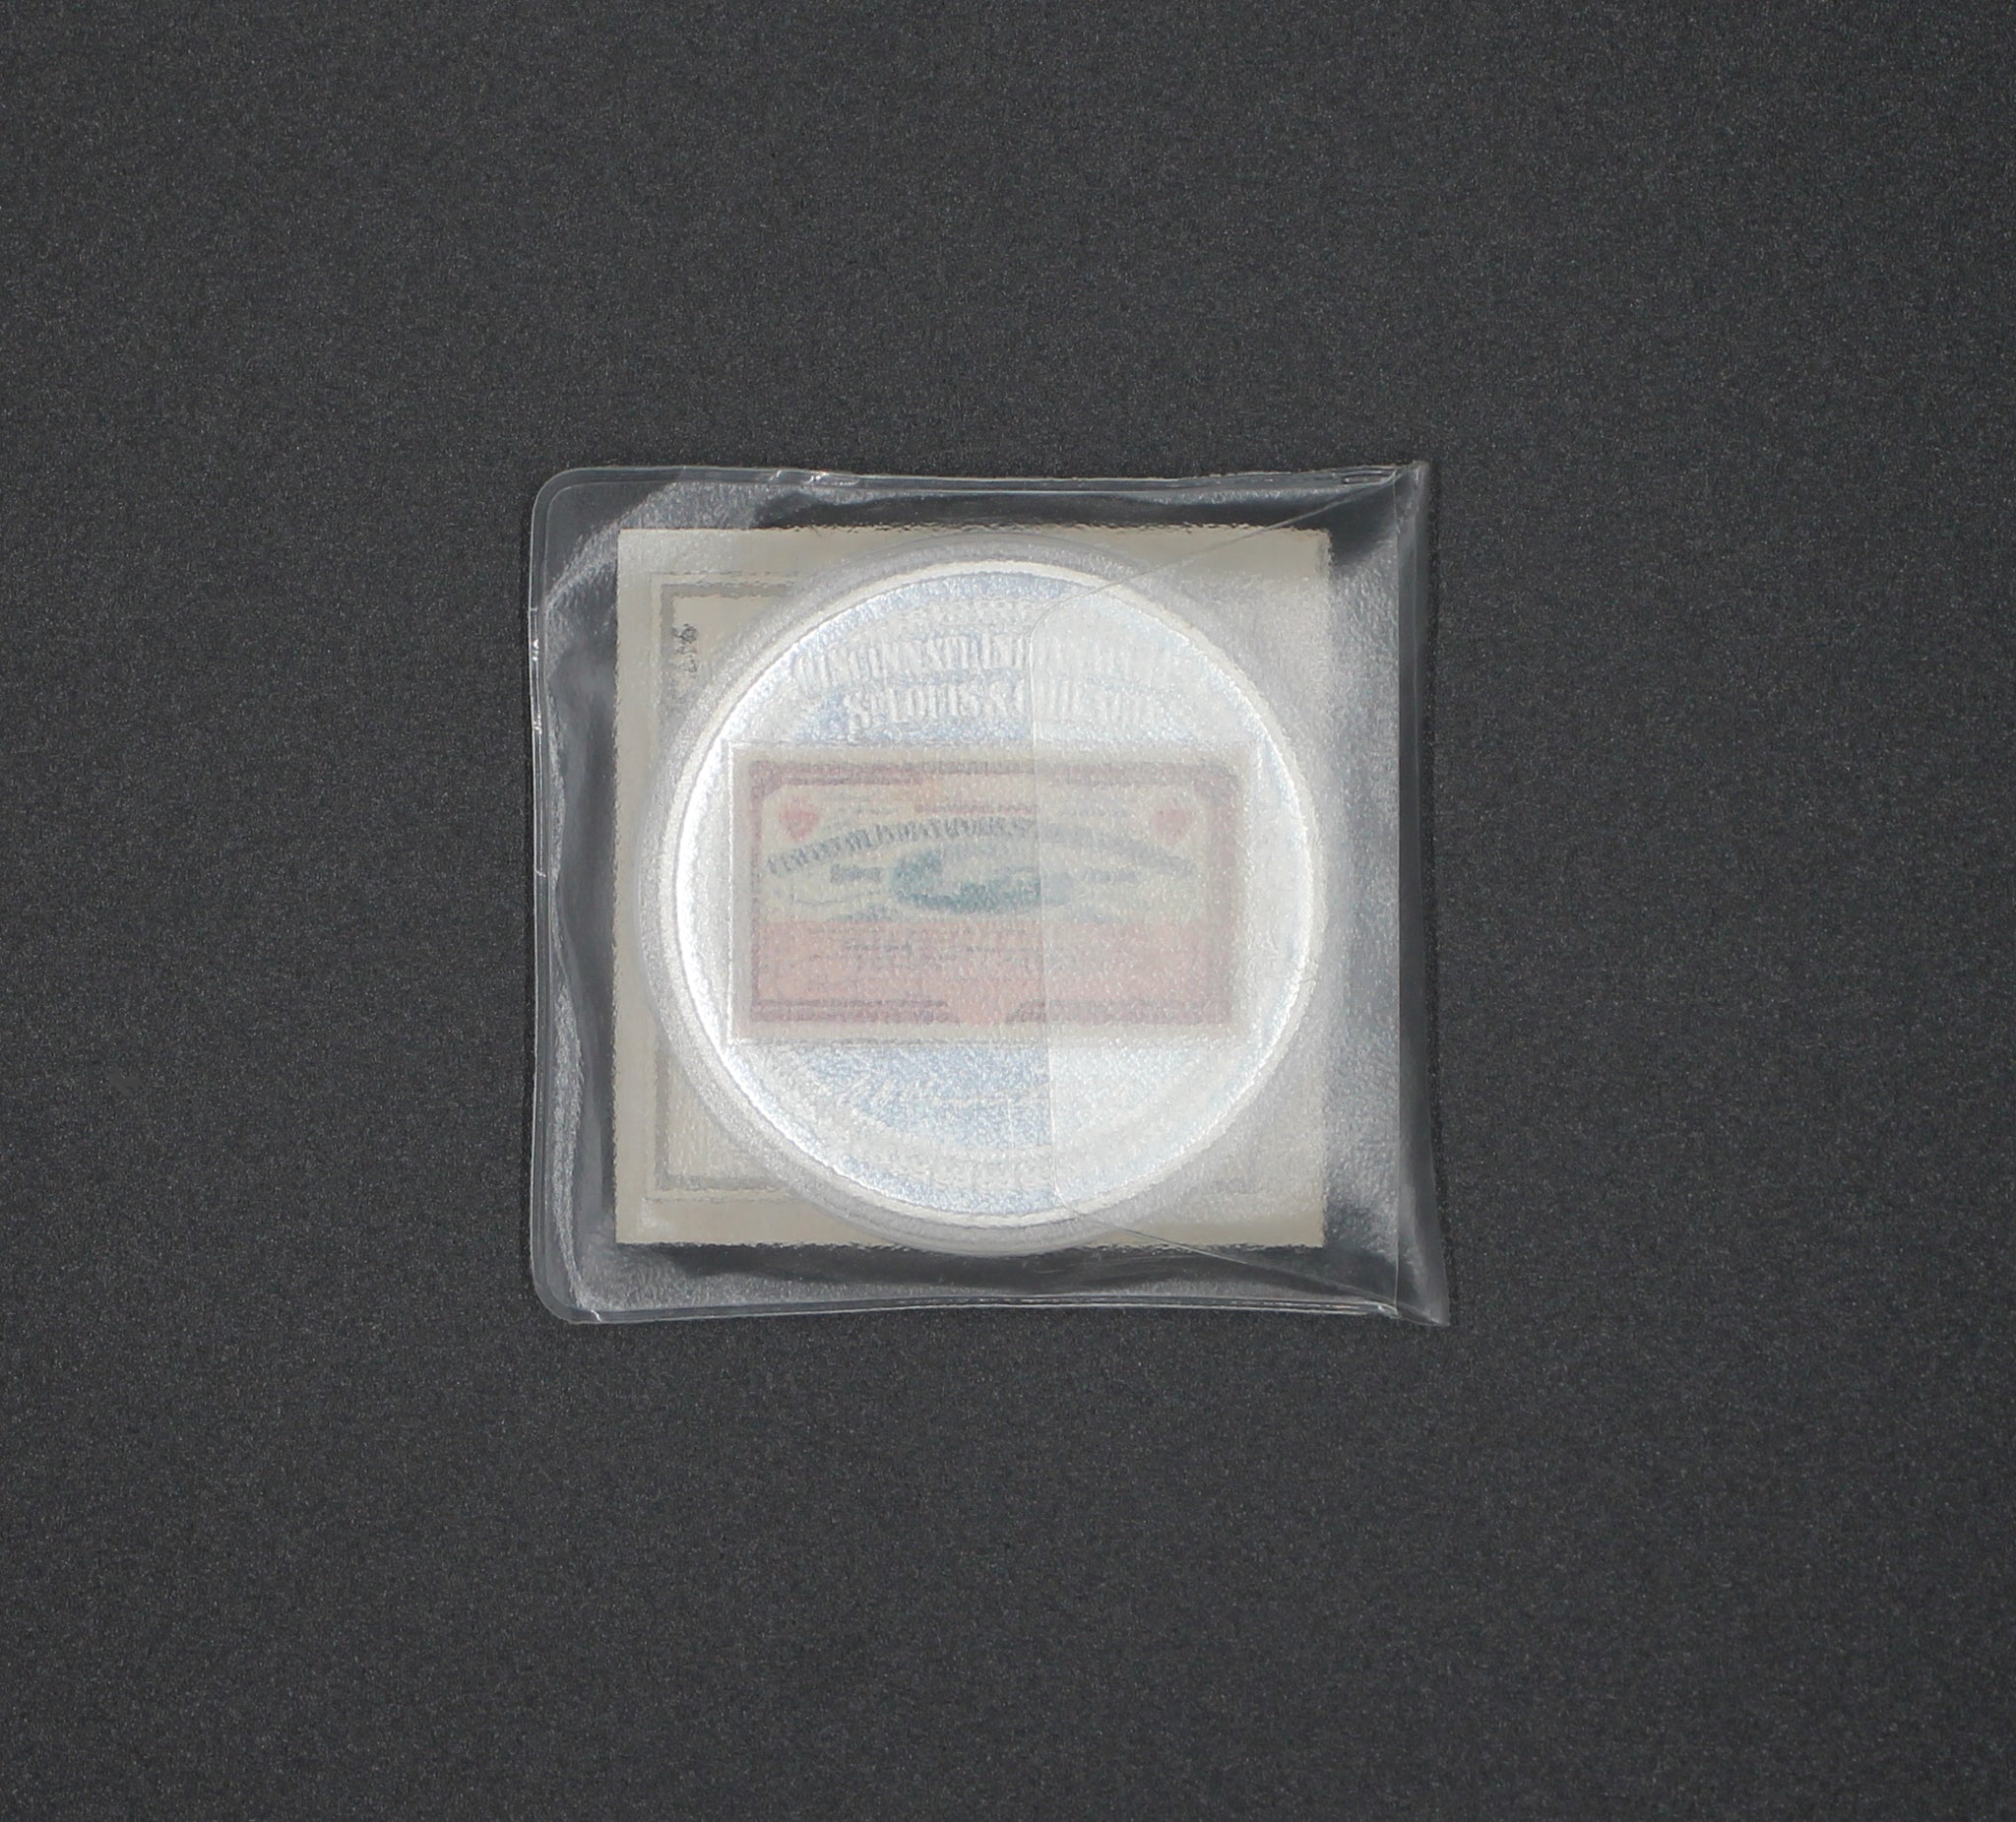 American Mint, Historic Stocks and Bonds St Louis Railway Coin